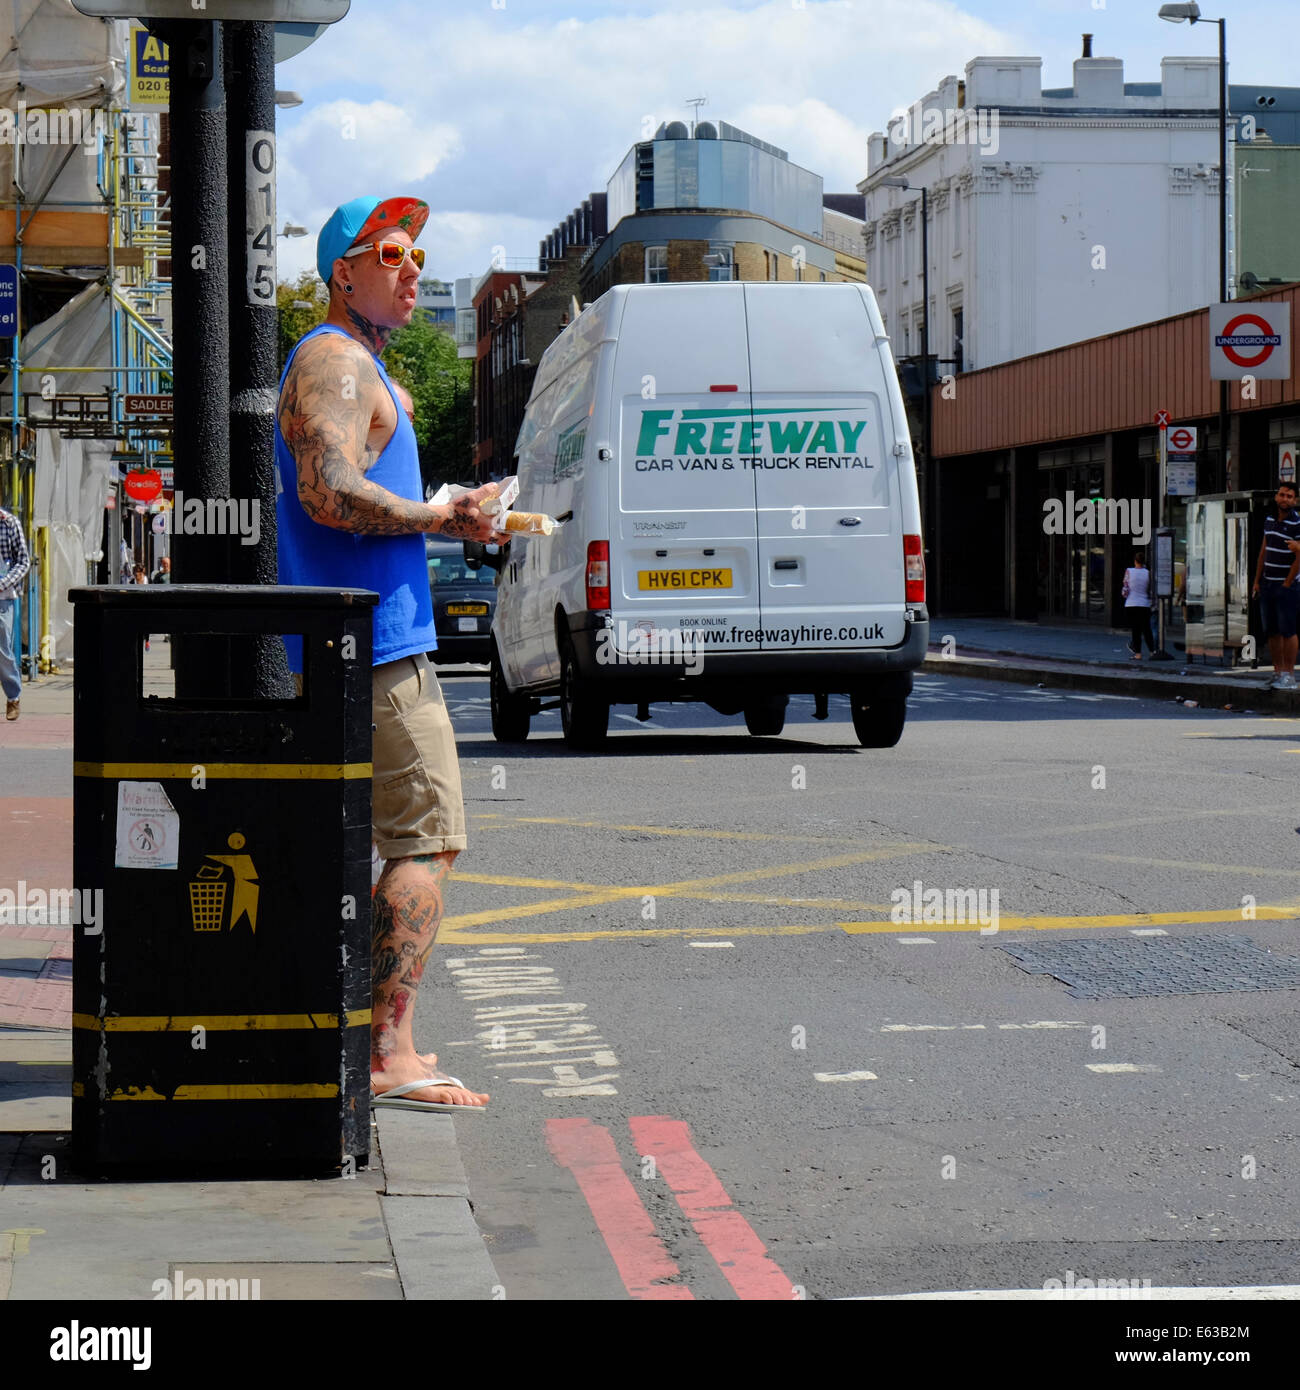 young man with tattoos carrying lunch, waiting to cross street in London Stock Photo